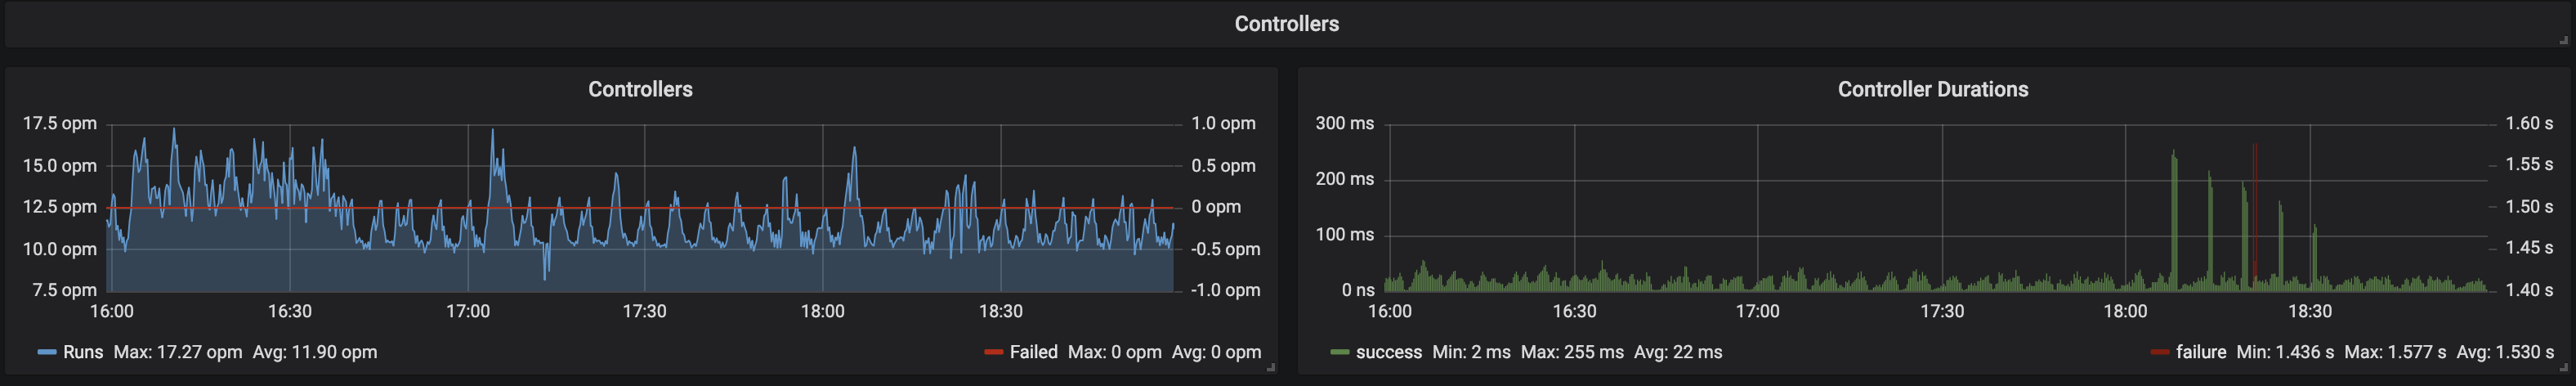 ../../_images/grafana_controllers.png